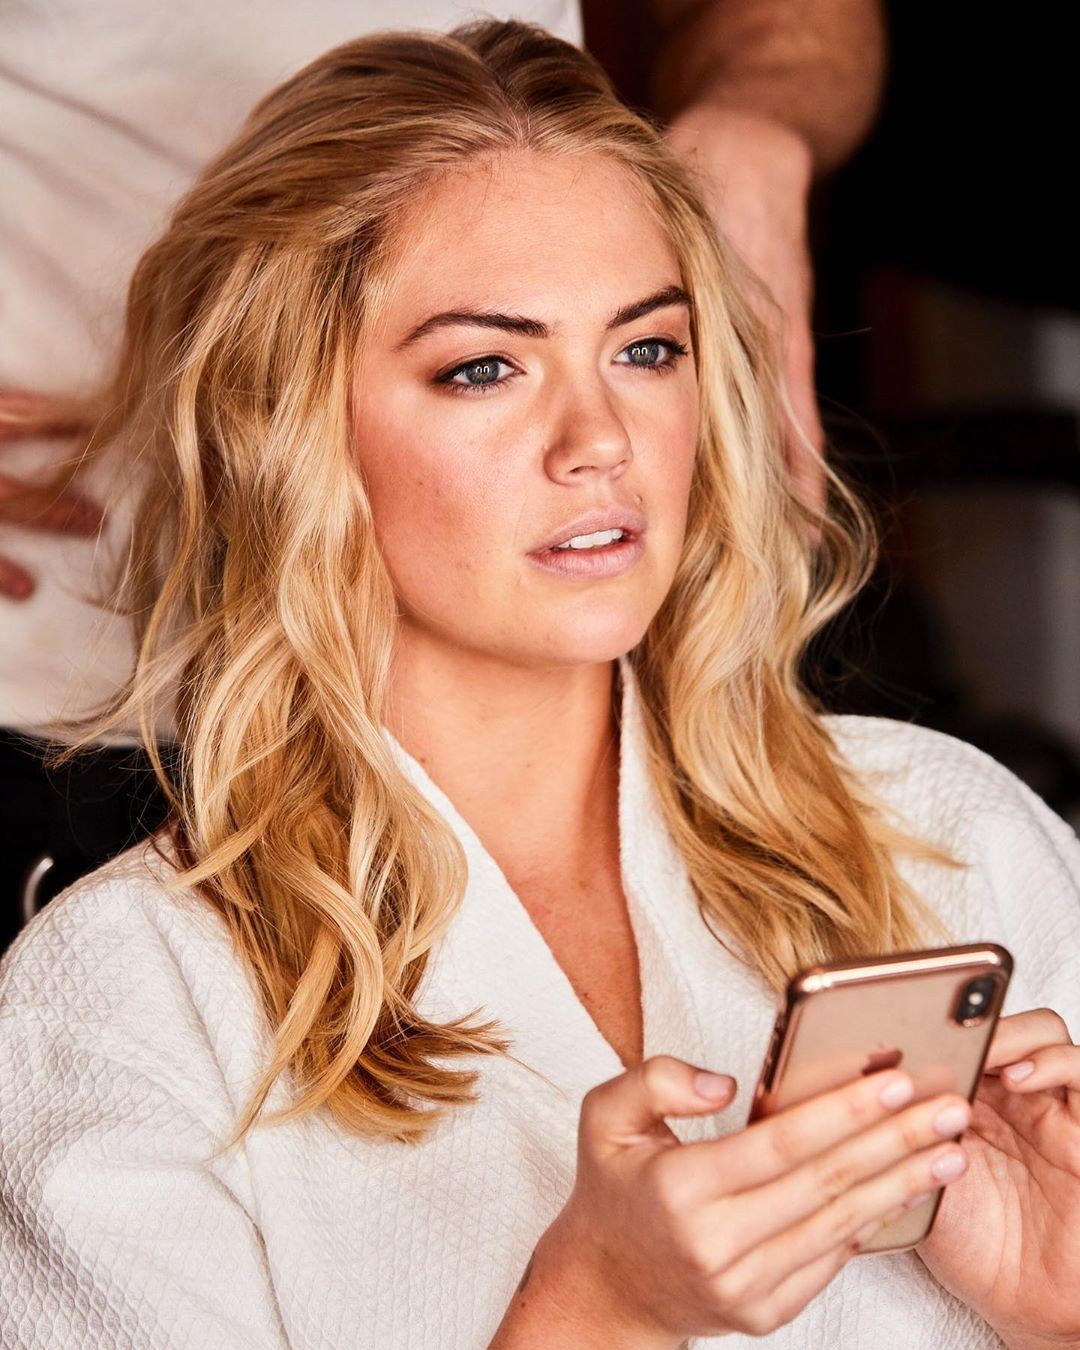 Kate Upton Sexy The Fappening Pro 20 - Kate Upton Fappening Sexy (21 Photos + Video)